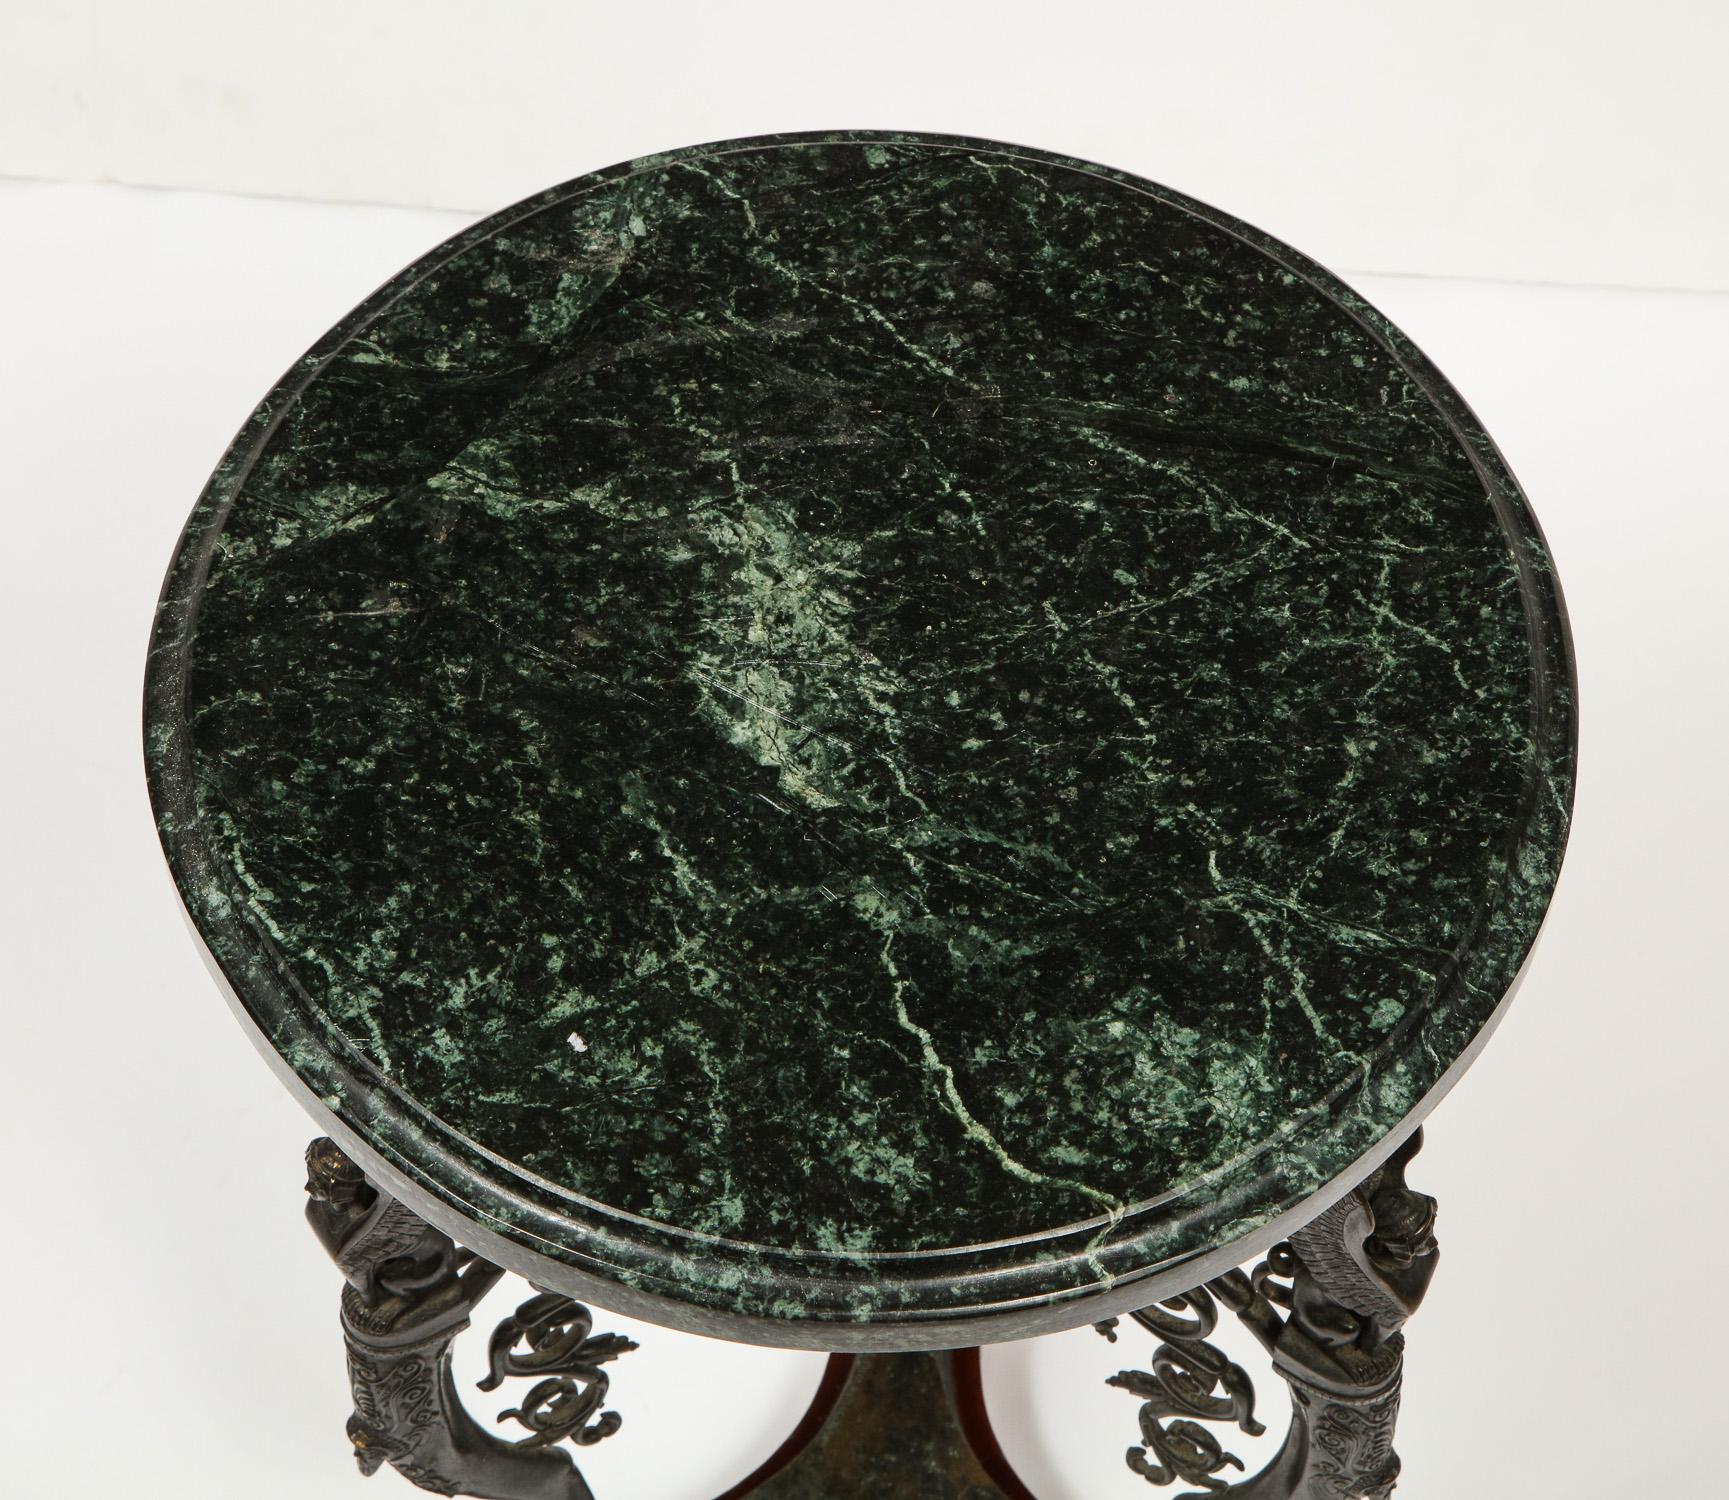 20th Century Neoclassical Greek Revival Bronze and Marble Gueridon Table, Sabatino de Angelis